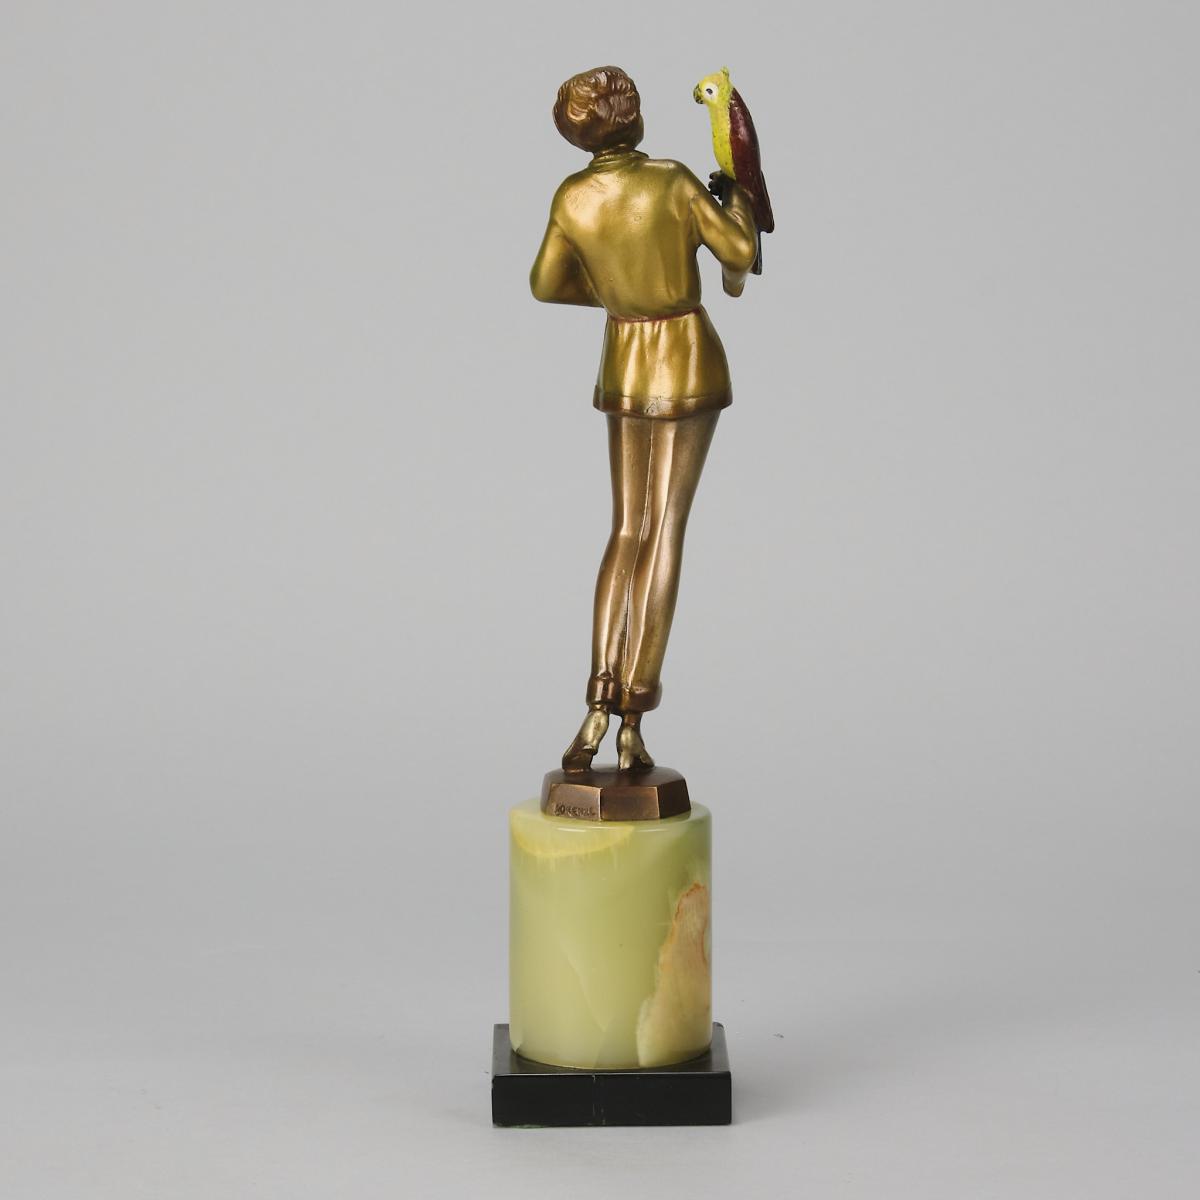 Cold-Painted Bronze Sculpture entitled "Girl with Parrot" by Josef Lorenzl